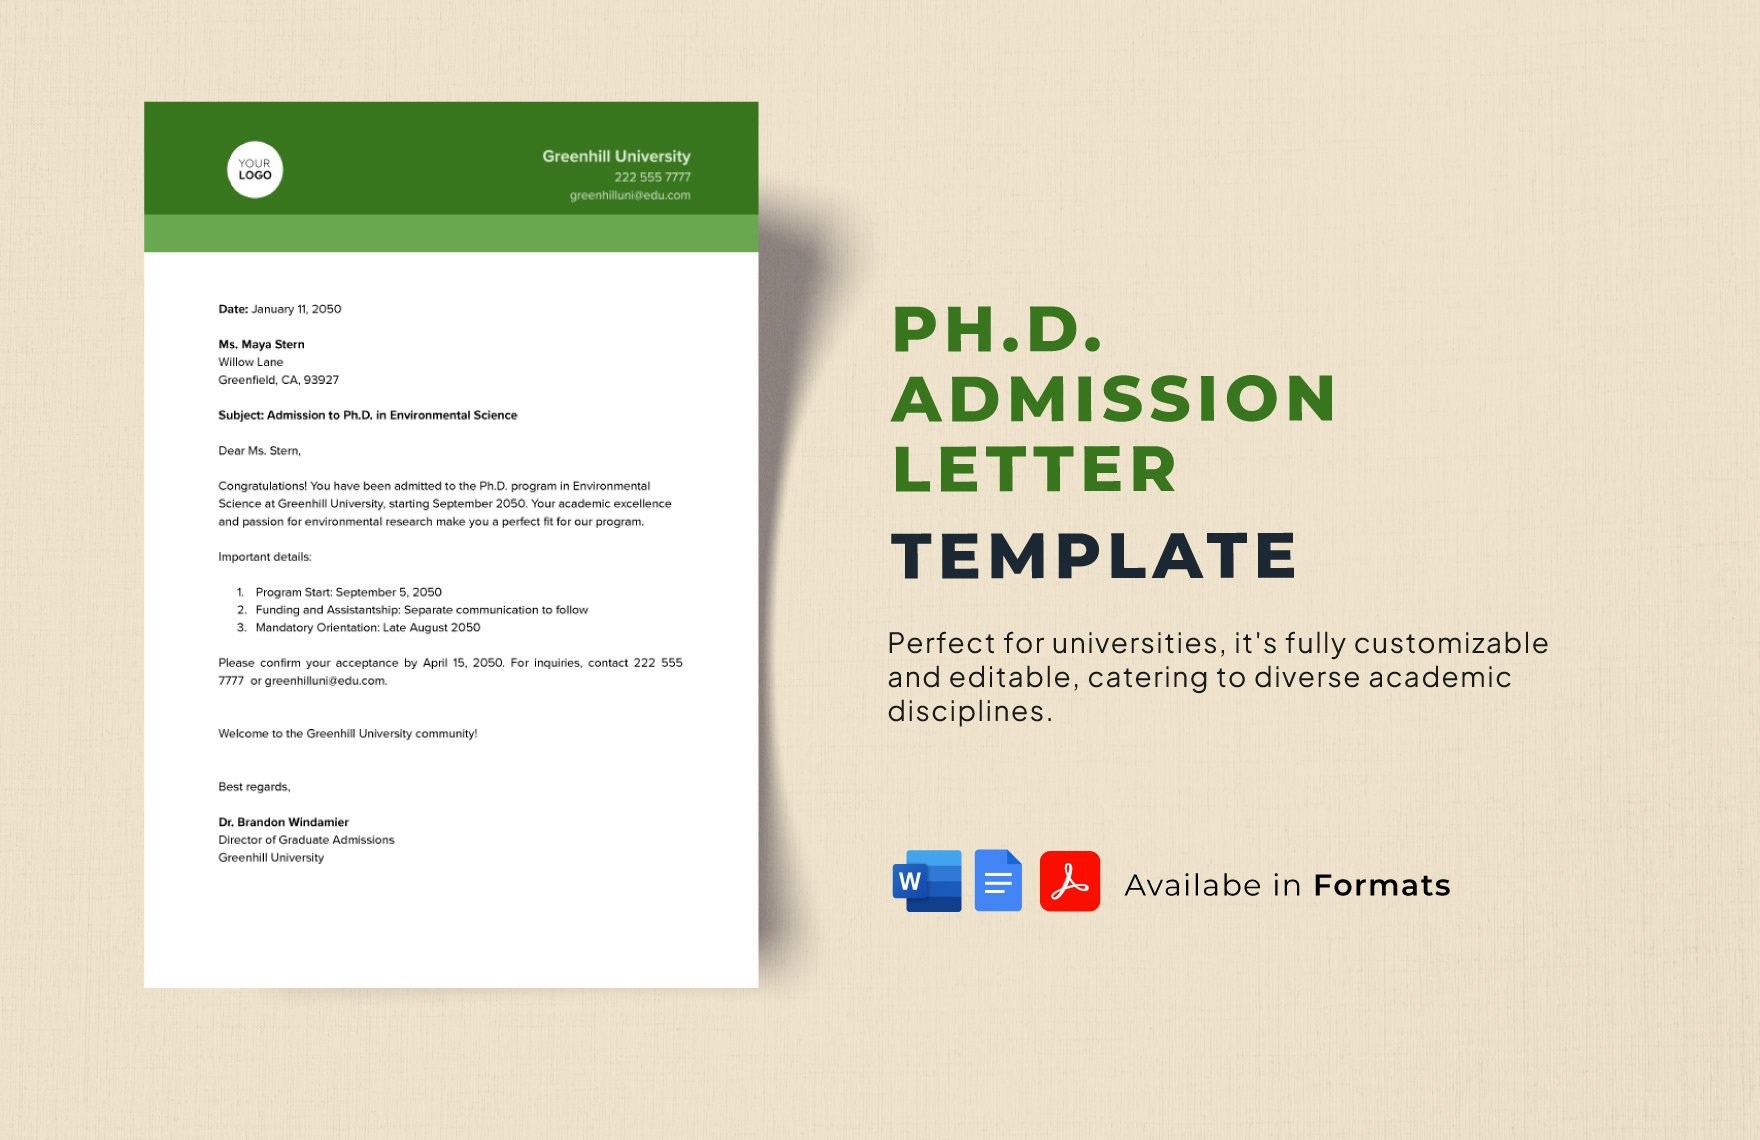 Ph.D. Admission Letter Template